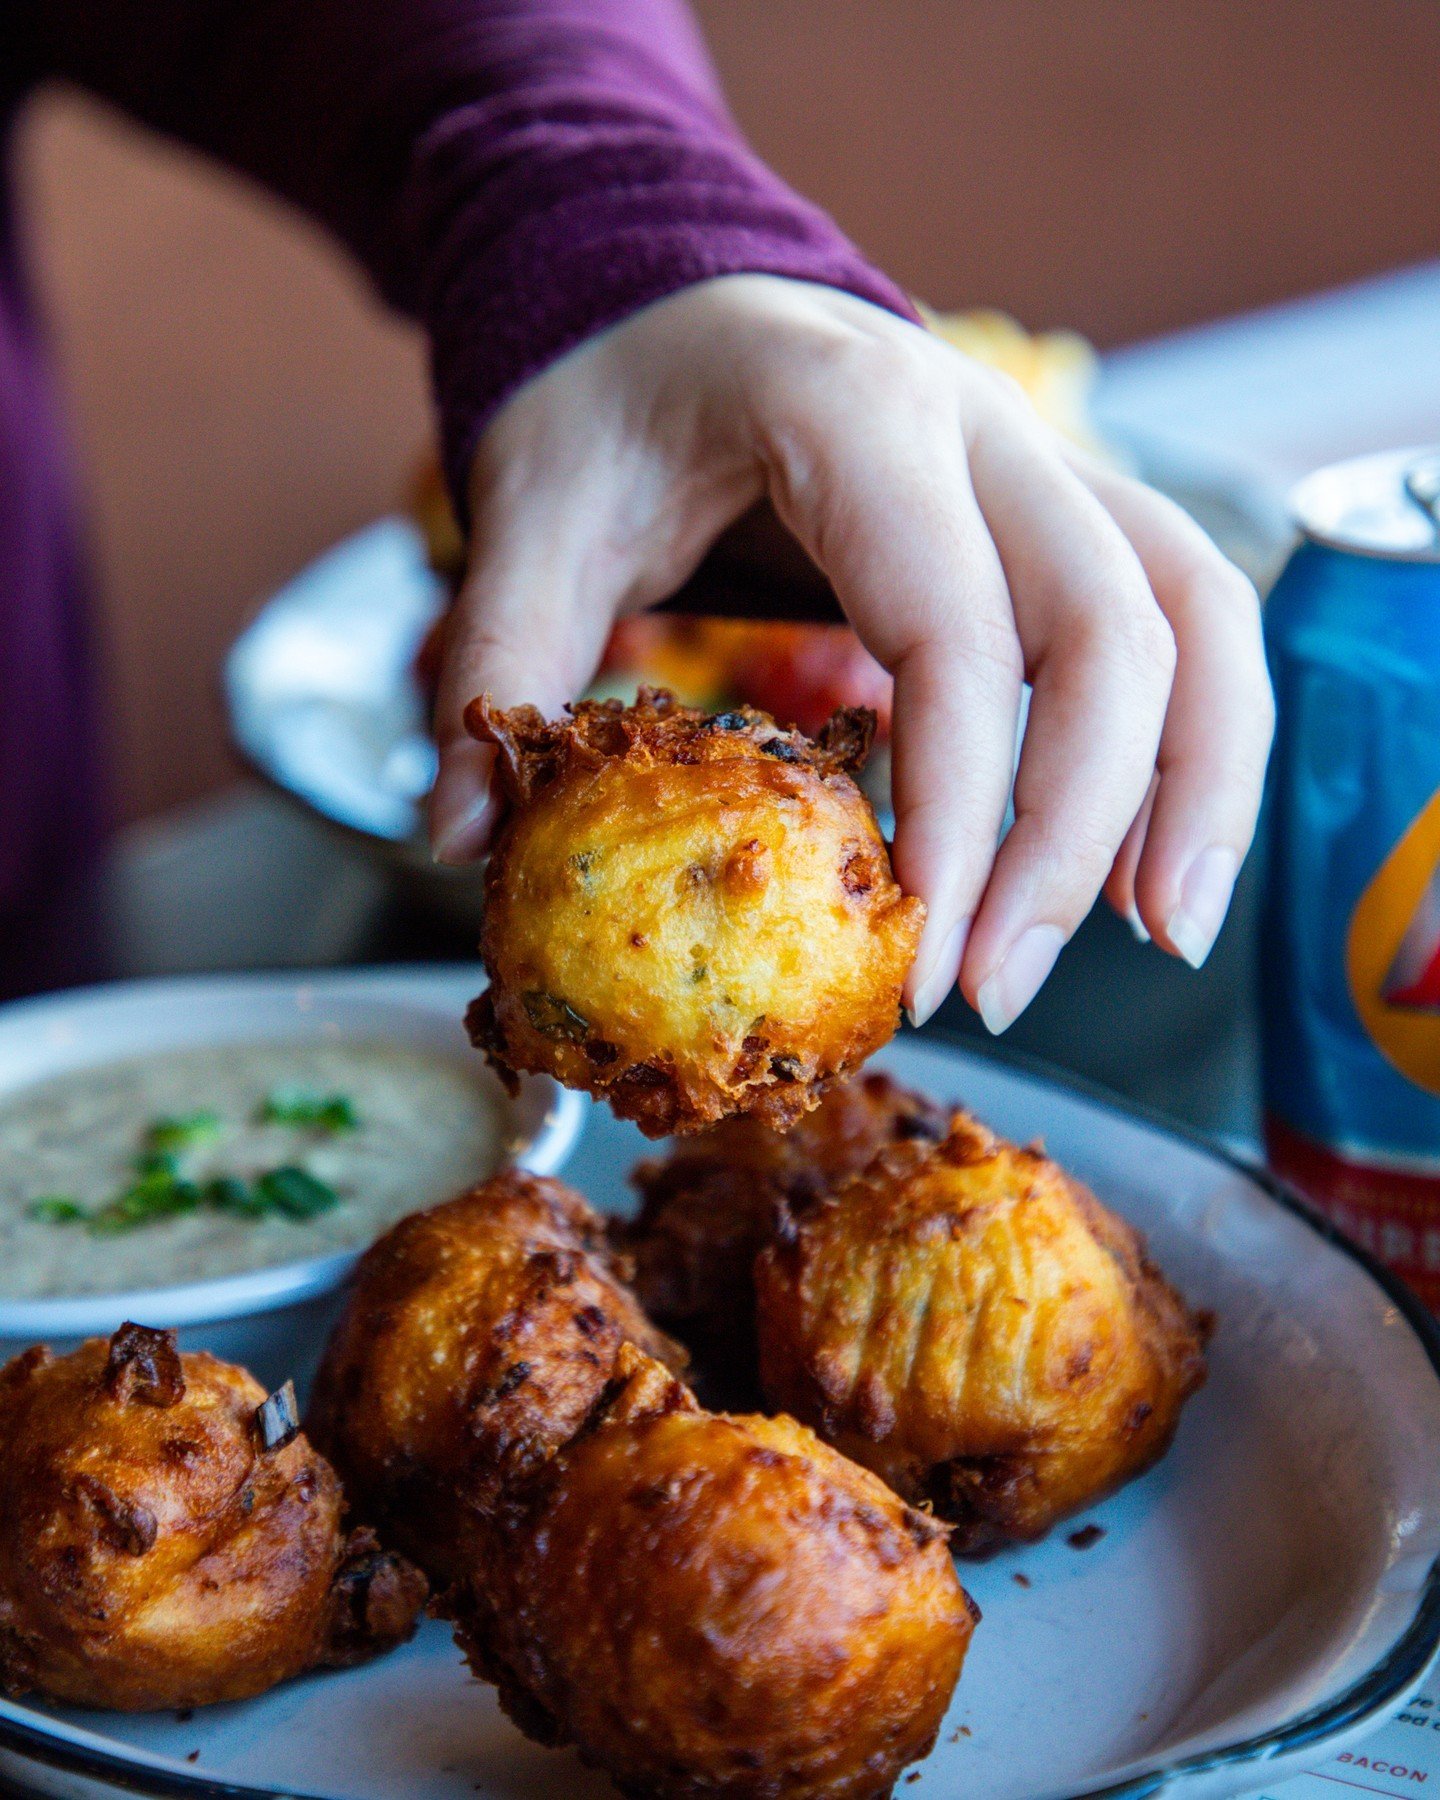 Put the 𝘧𝘳𝘪𝘦𝘥 into Friday with our Corn Fritters &mdash; filled with Creamed Corn, Bacon, Cheddar, Jalape&ntilde;os, and served with a side of Jalape&ntilde;o Remoulade! 🌶️🤤

#24Diner #DowntownAustin #AustinEats #AustinFoodies #CornFritters #5